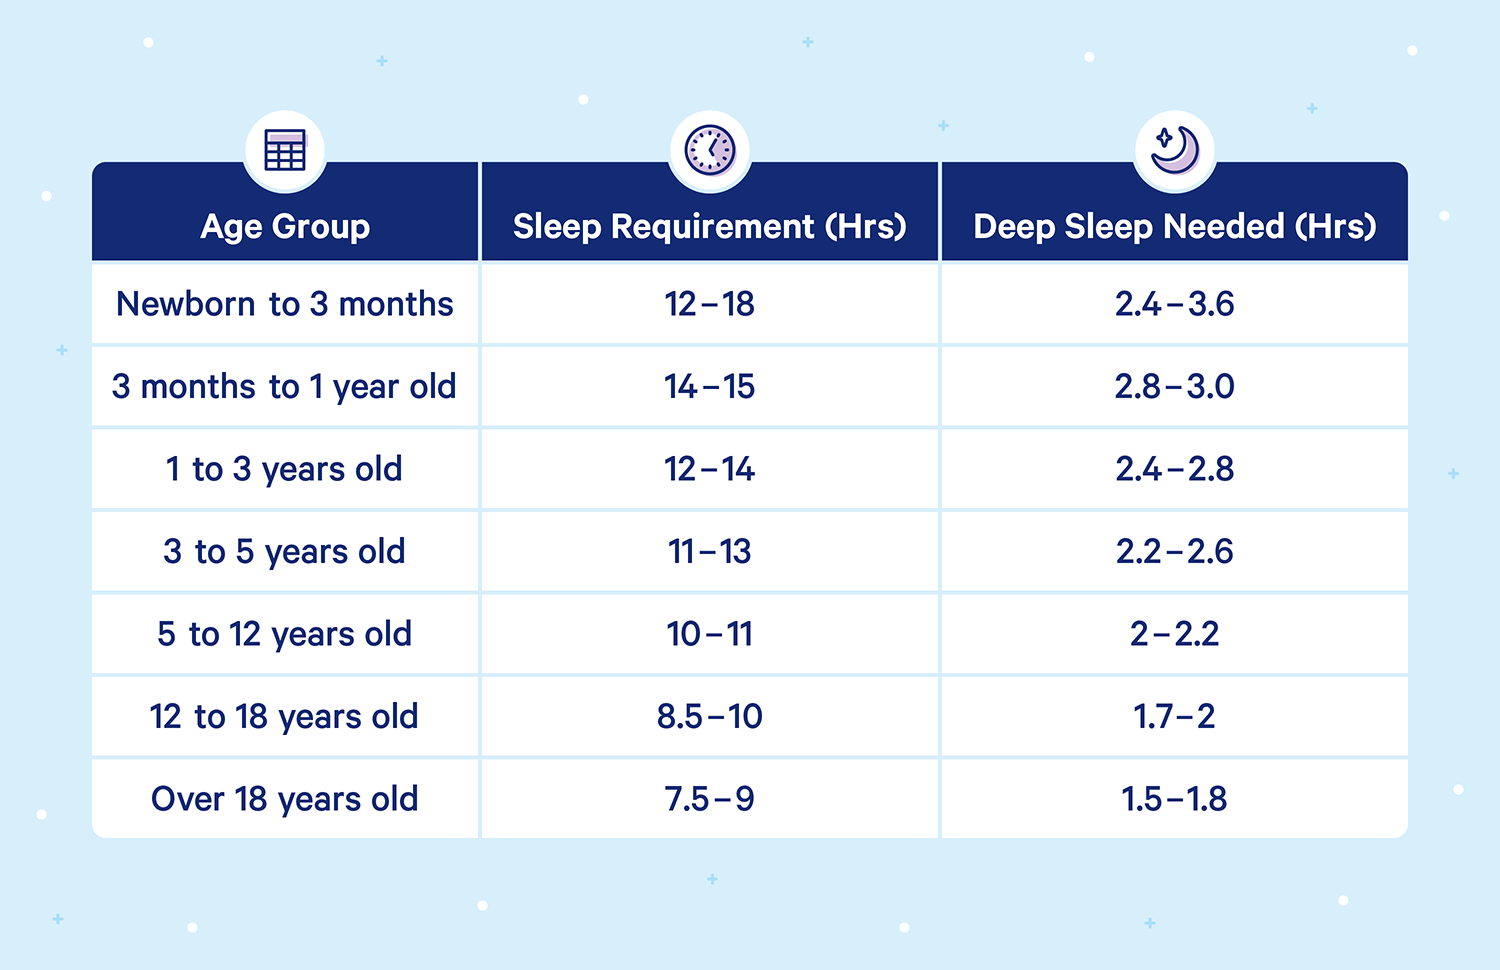 A chart showing age group, sleep requirment in hours, and deep sleep needed in hours.